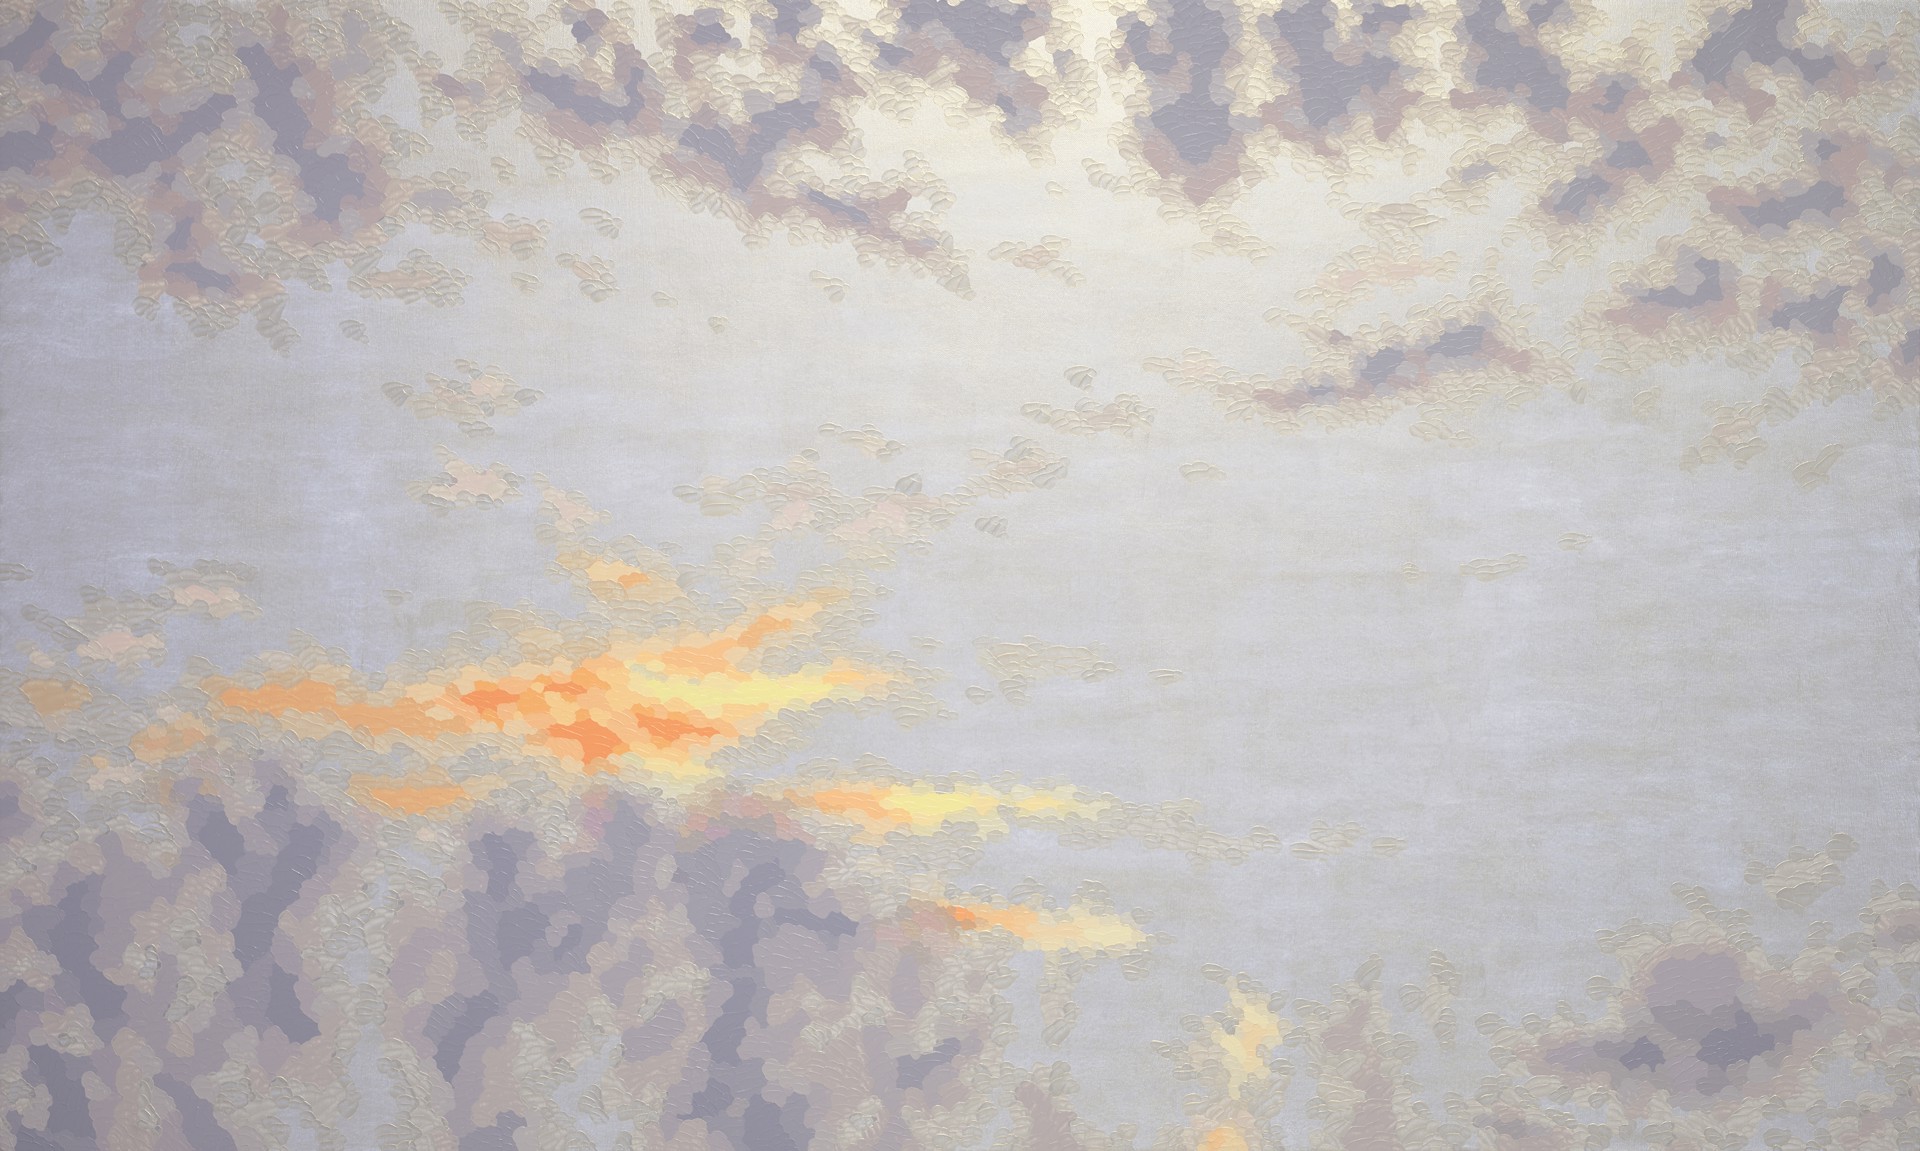 Expansive Skies (gold) by Elaine Coombs